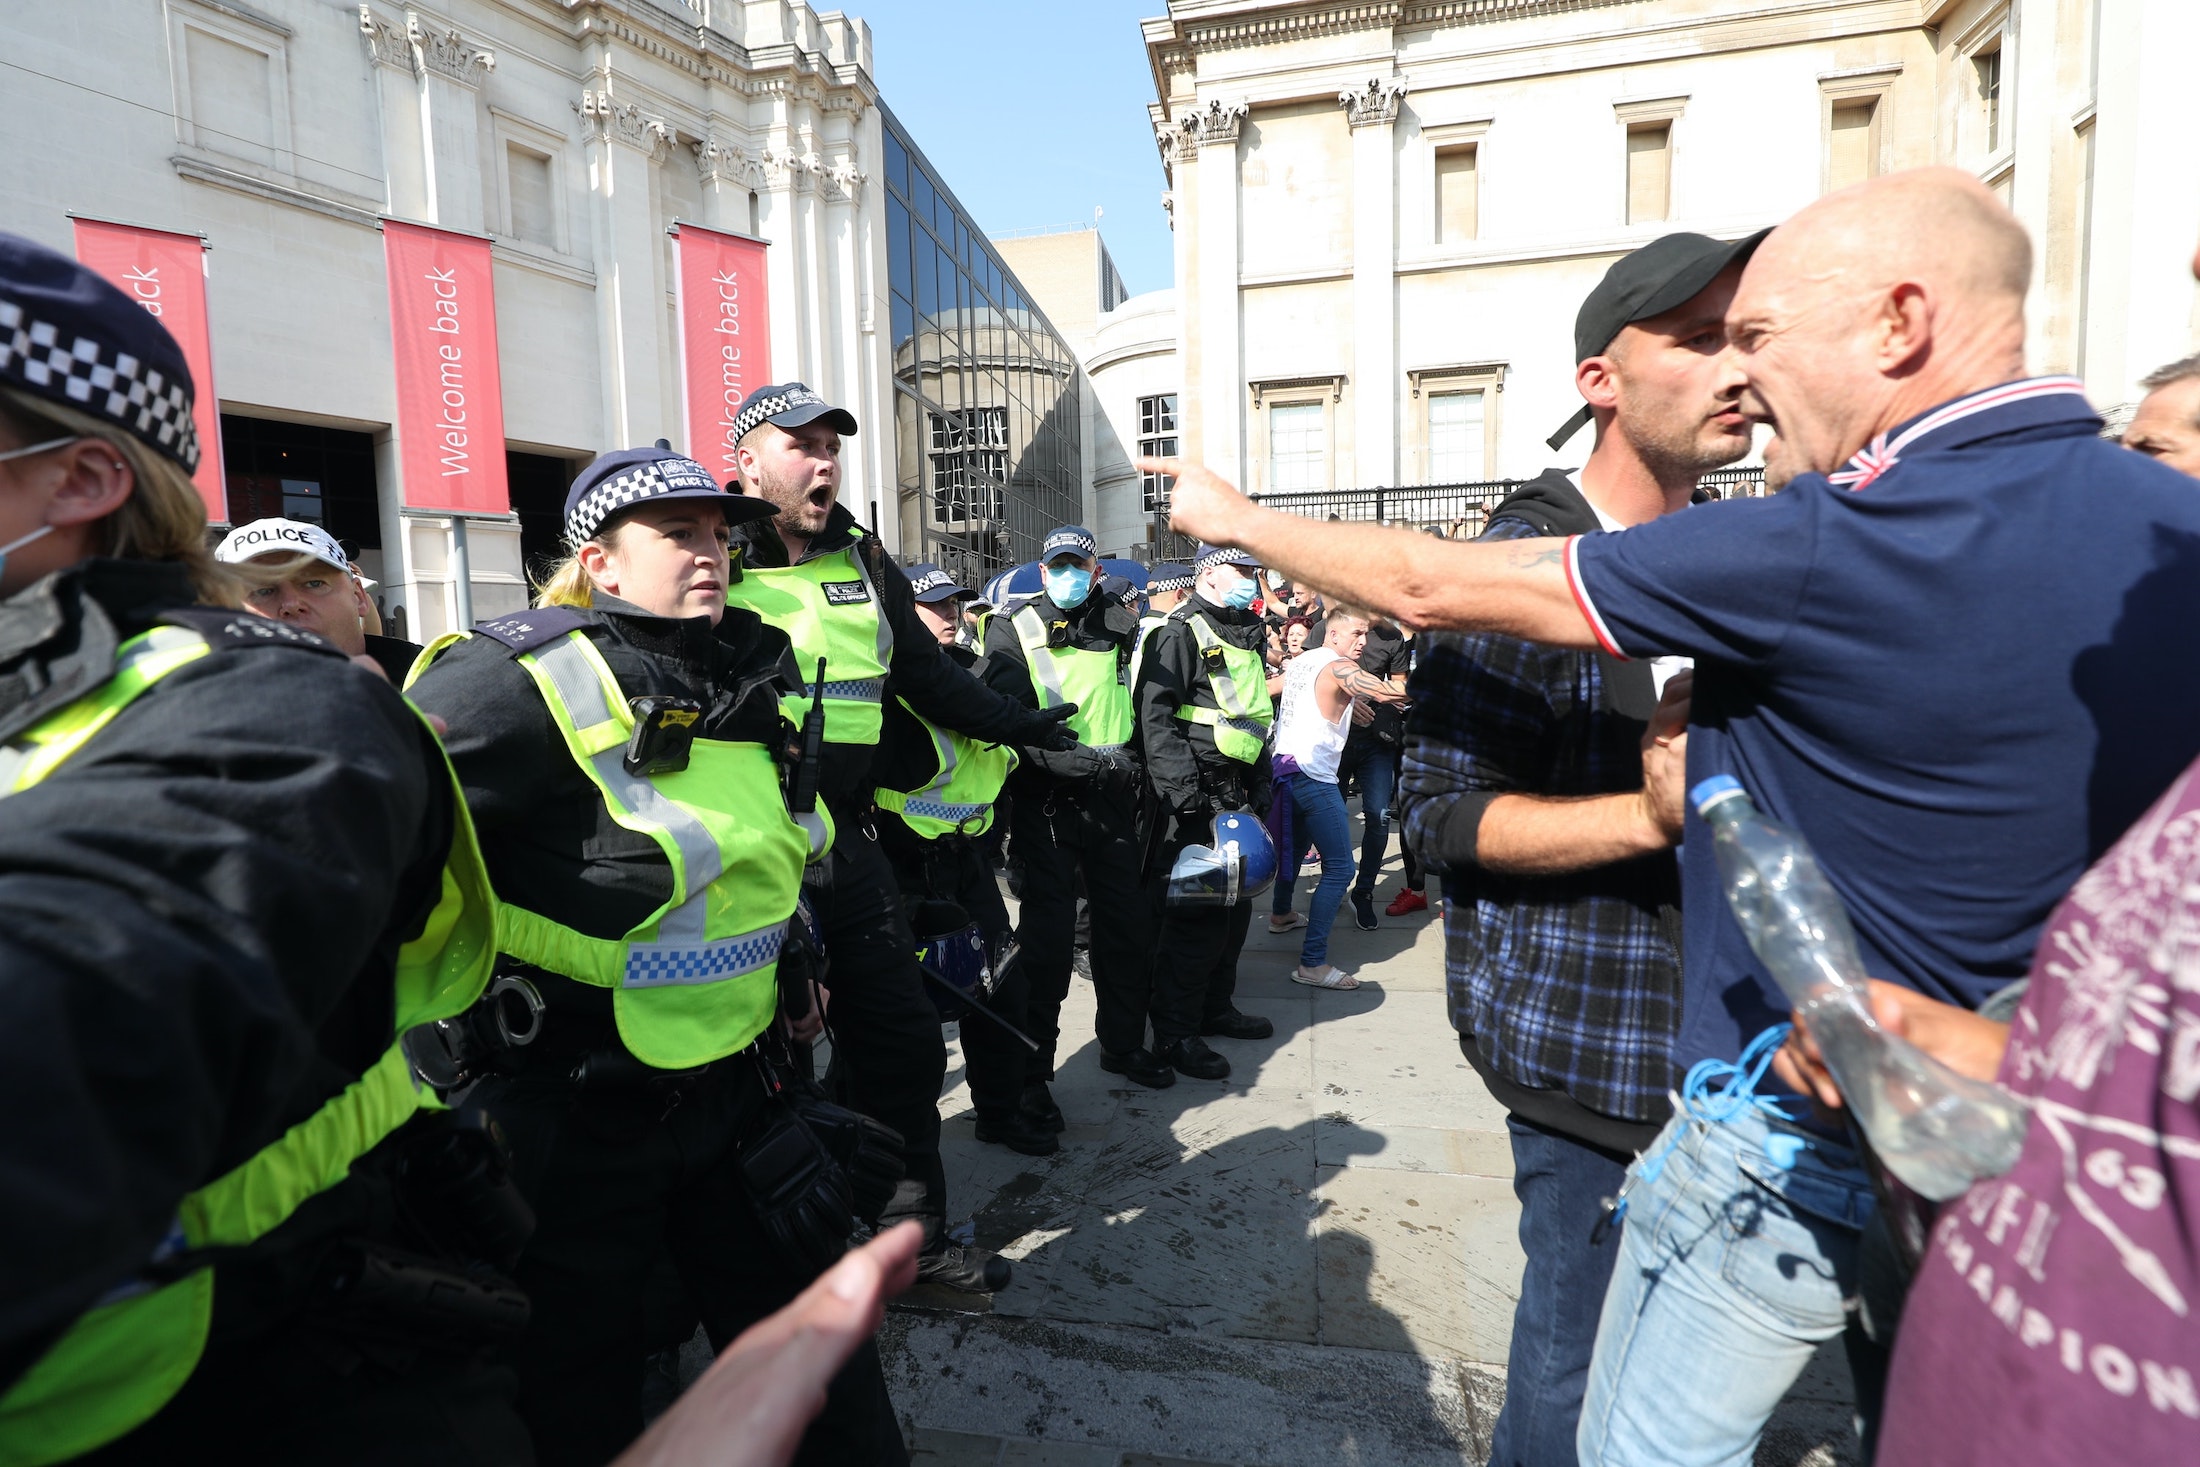 Video – Covidiots? Police & protesters clash at anti-vax demonstration